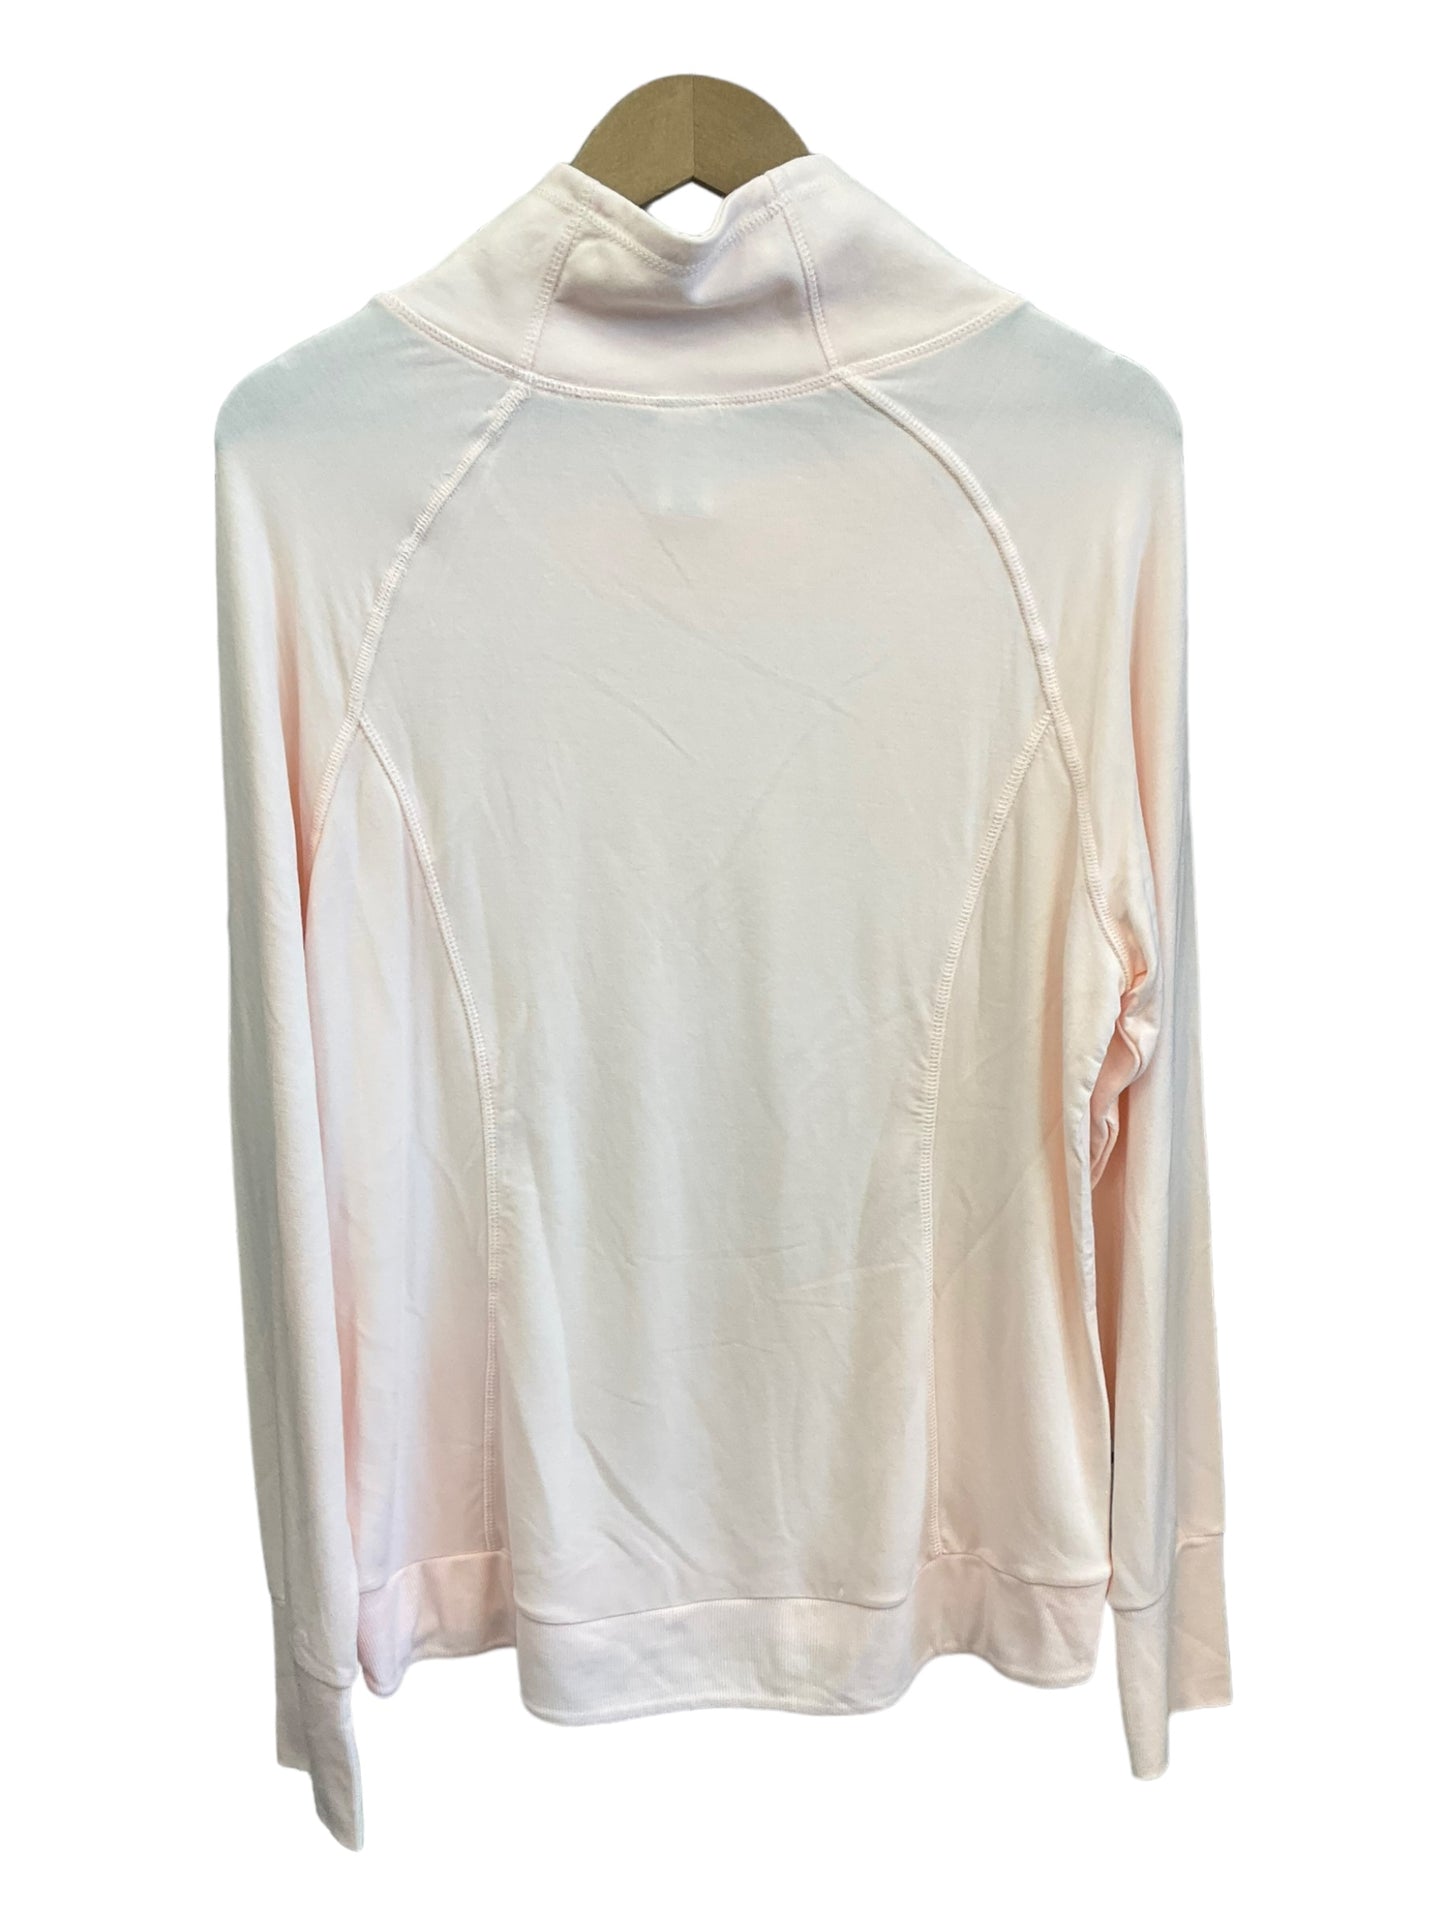 Athletic Top Long Sleeve Collar By Yogalicious  Size: L